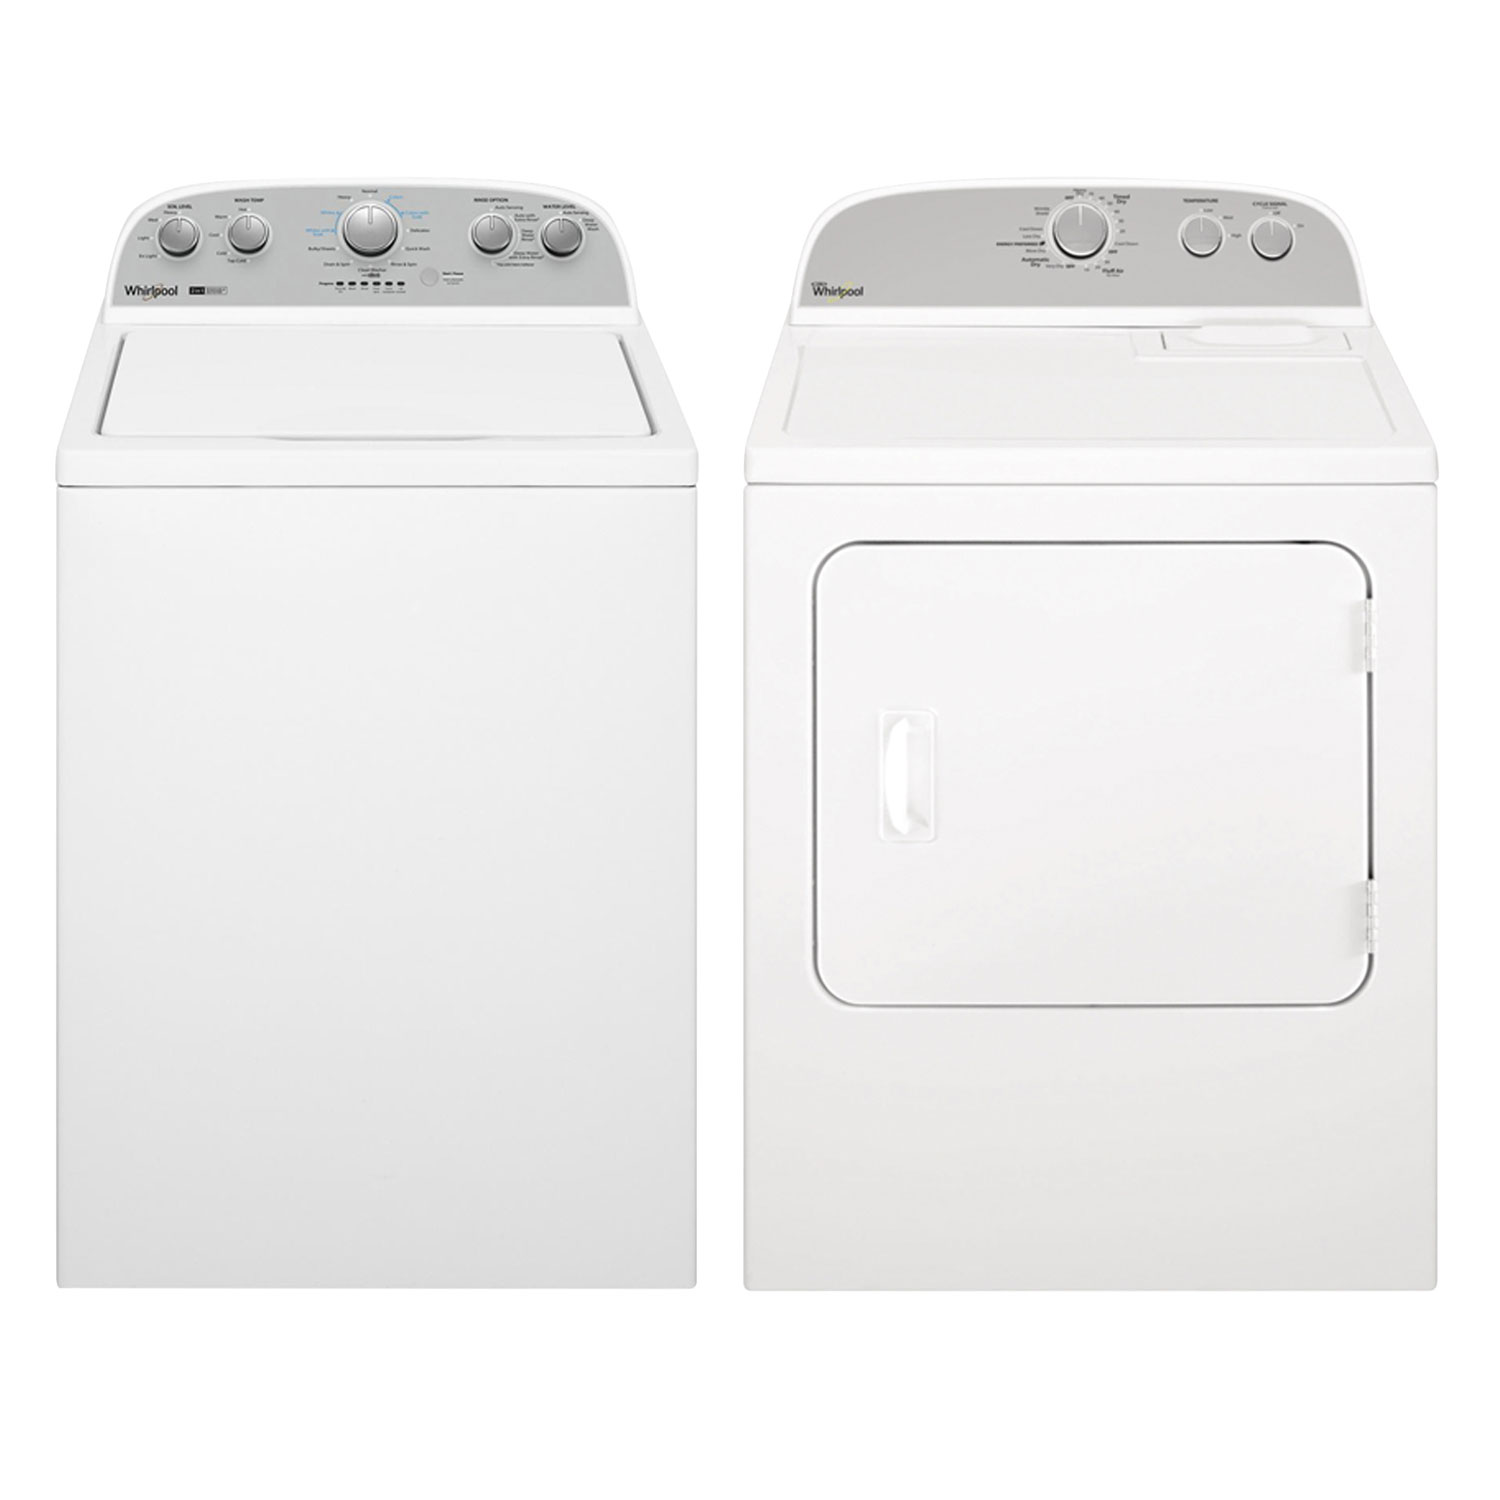 Whirlpool 4.5 Cu. Ft. High Efficiency Top Load Washer & Electric Dryer - White